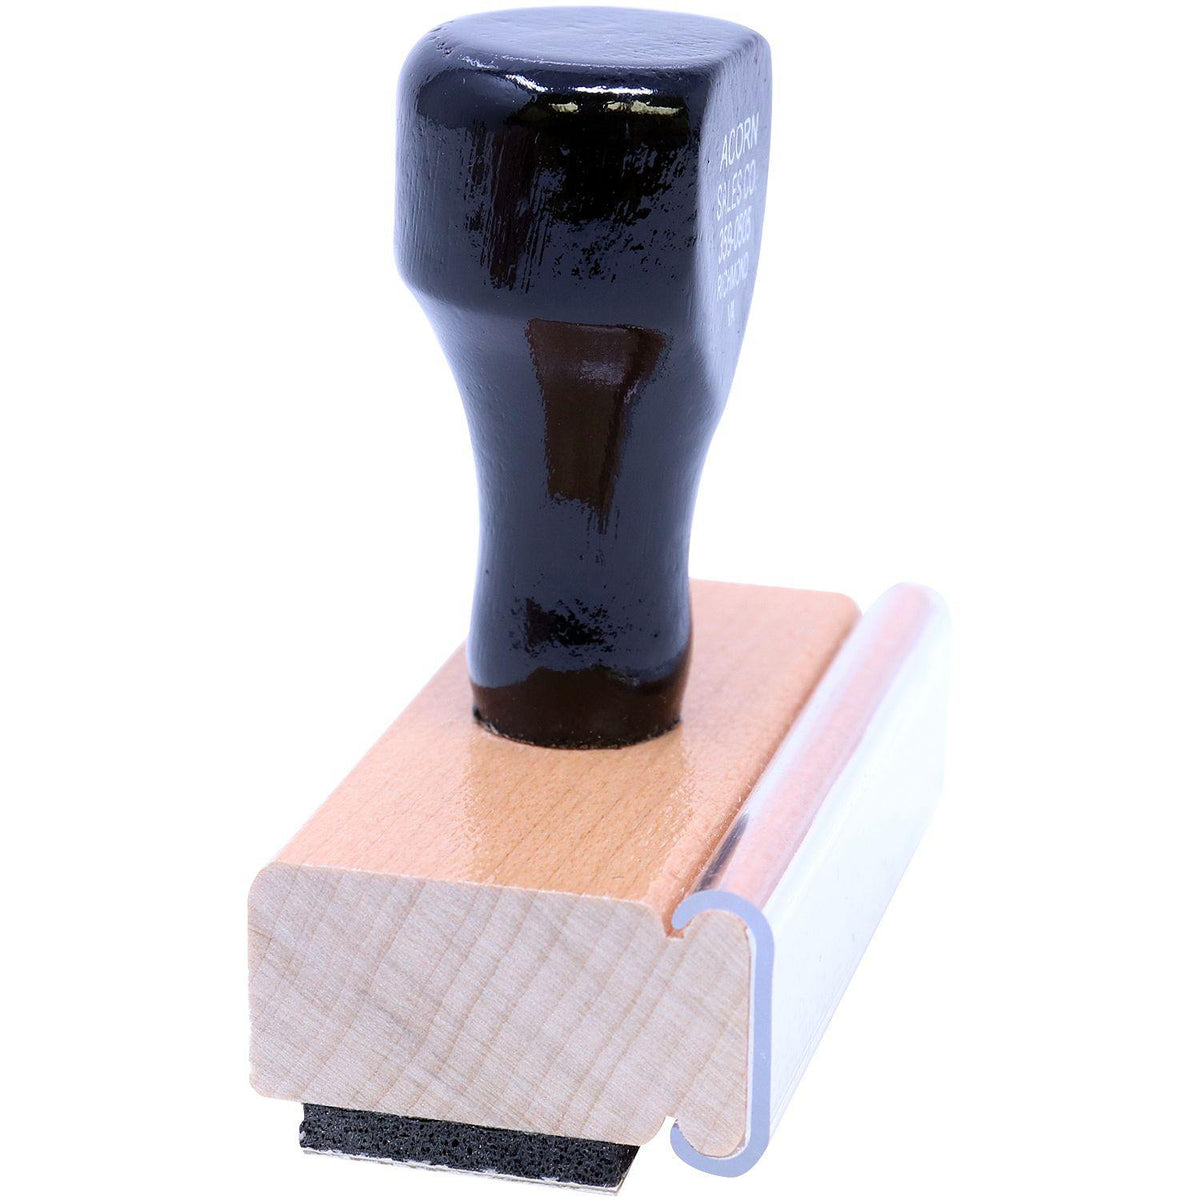 Side View of Large School Meeting Tonight Rubber Stamp at an Angle